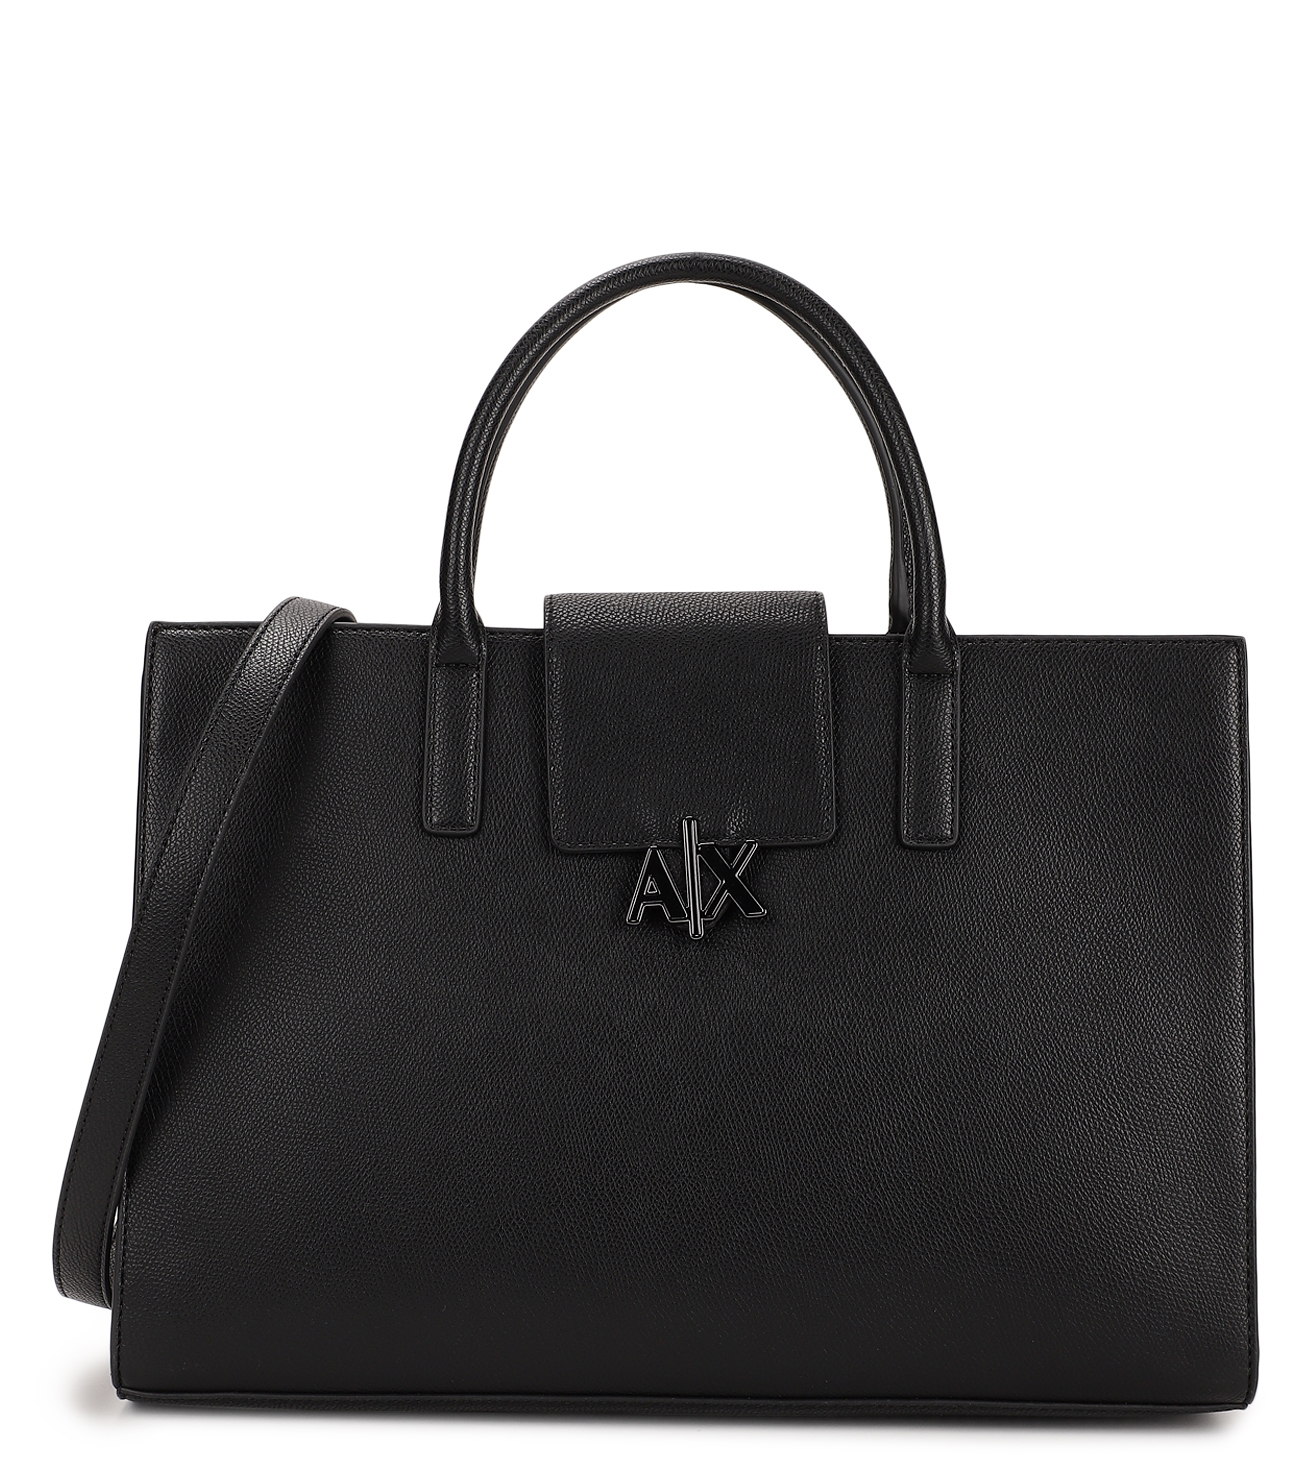 Armani Jeans Perforated Eco Leather East West Tote Shoulder Bag | Bags, Armani  jeans bags, Fab bag